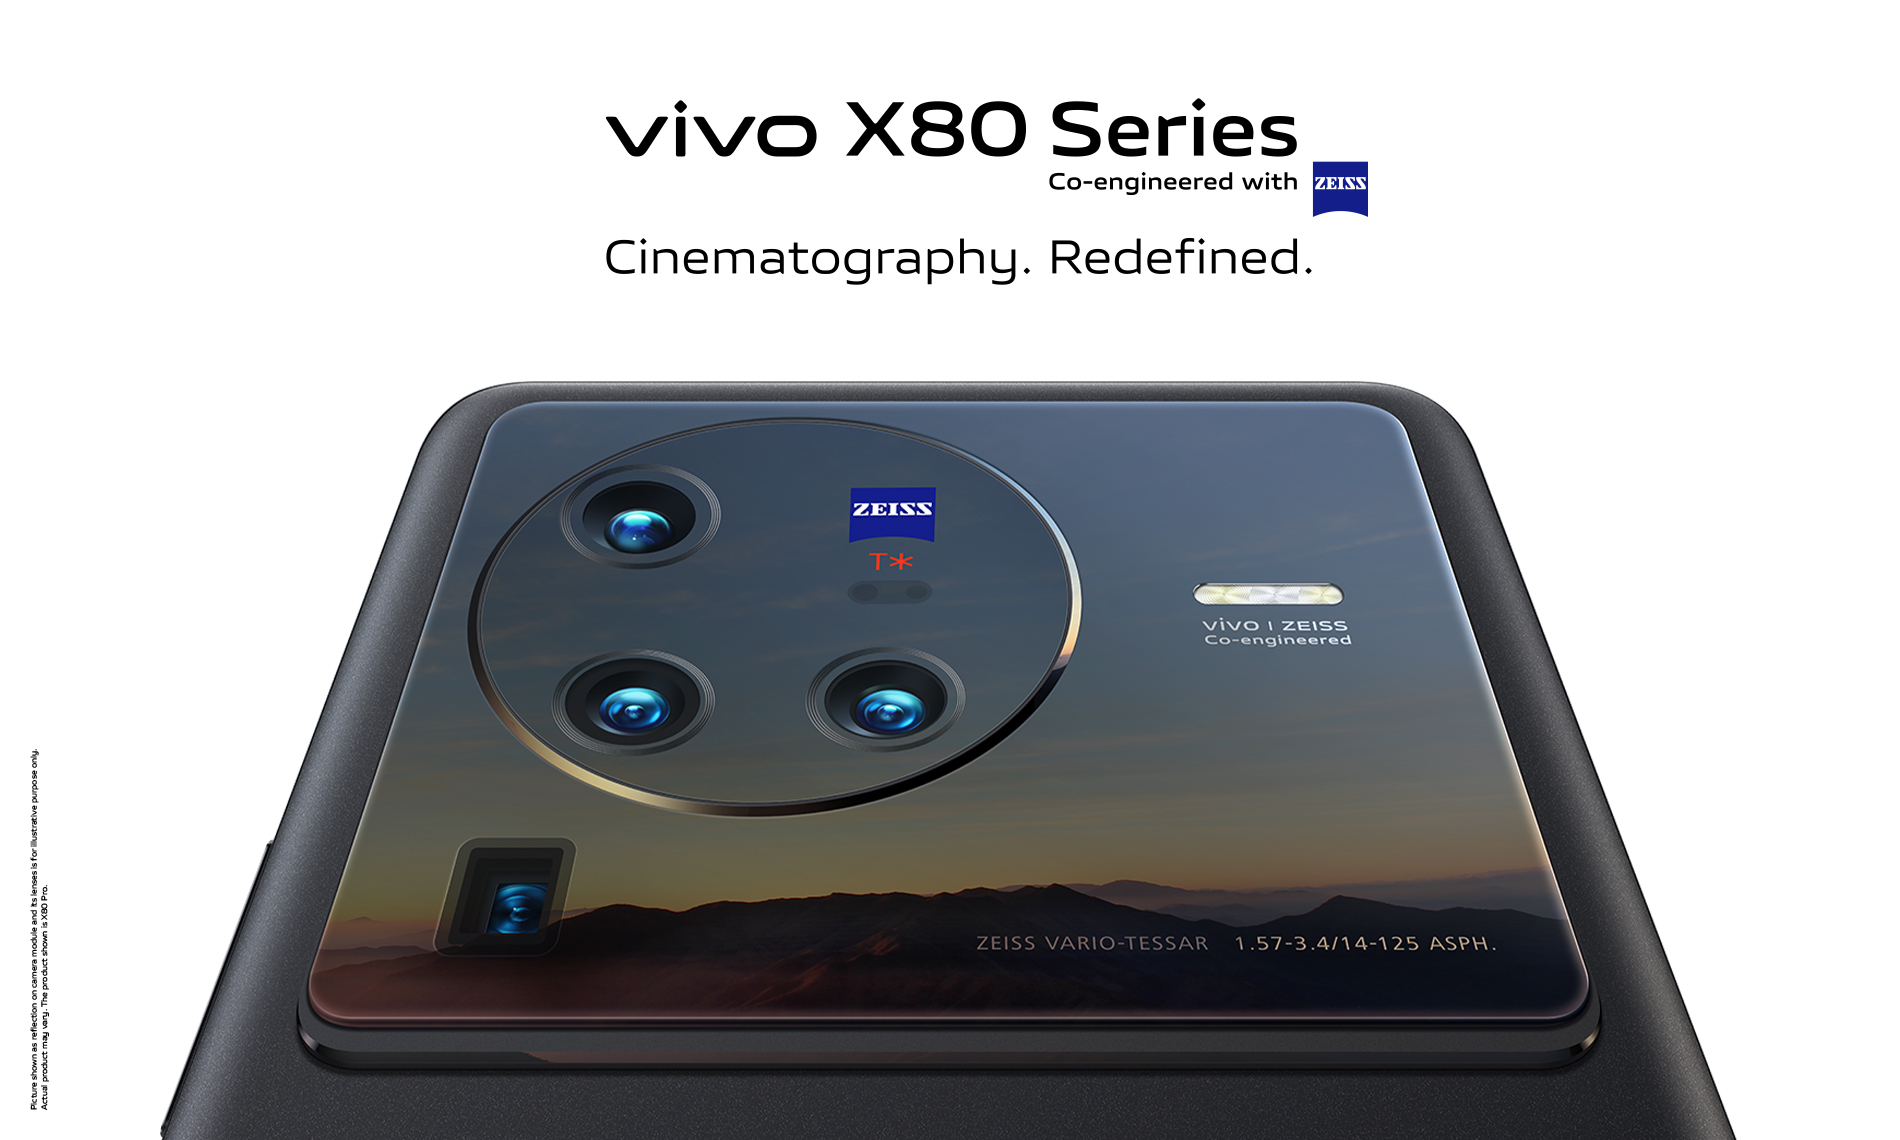 vivo launches flagship X80 Series in India with Pro-Imaging Chip V1+, Redefining Premium Mobile Photography in collaboration with ZEISS